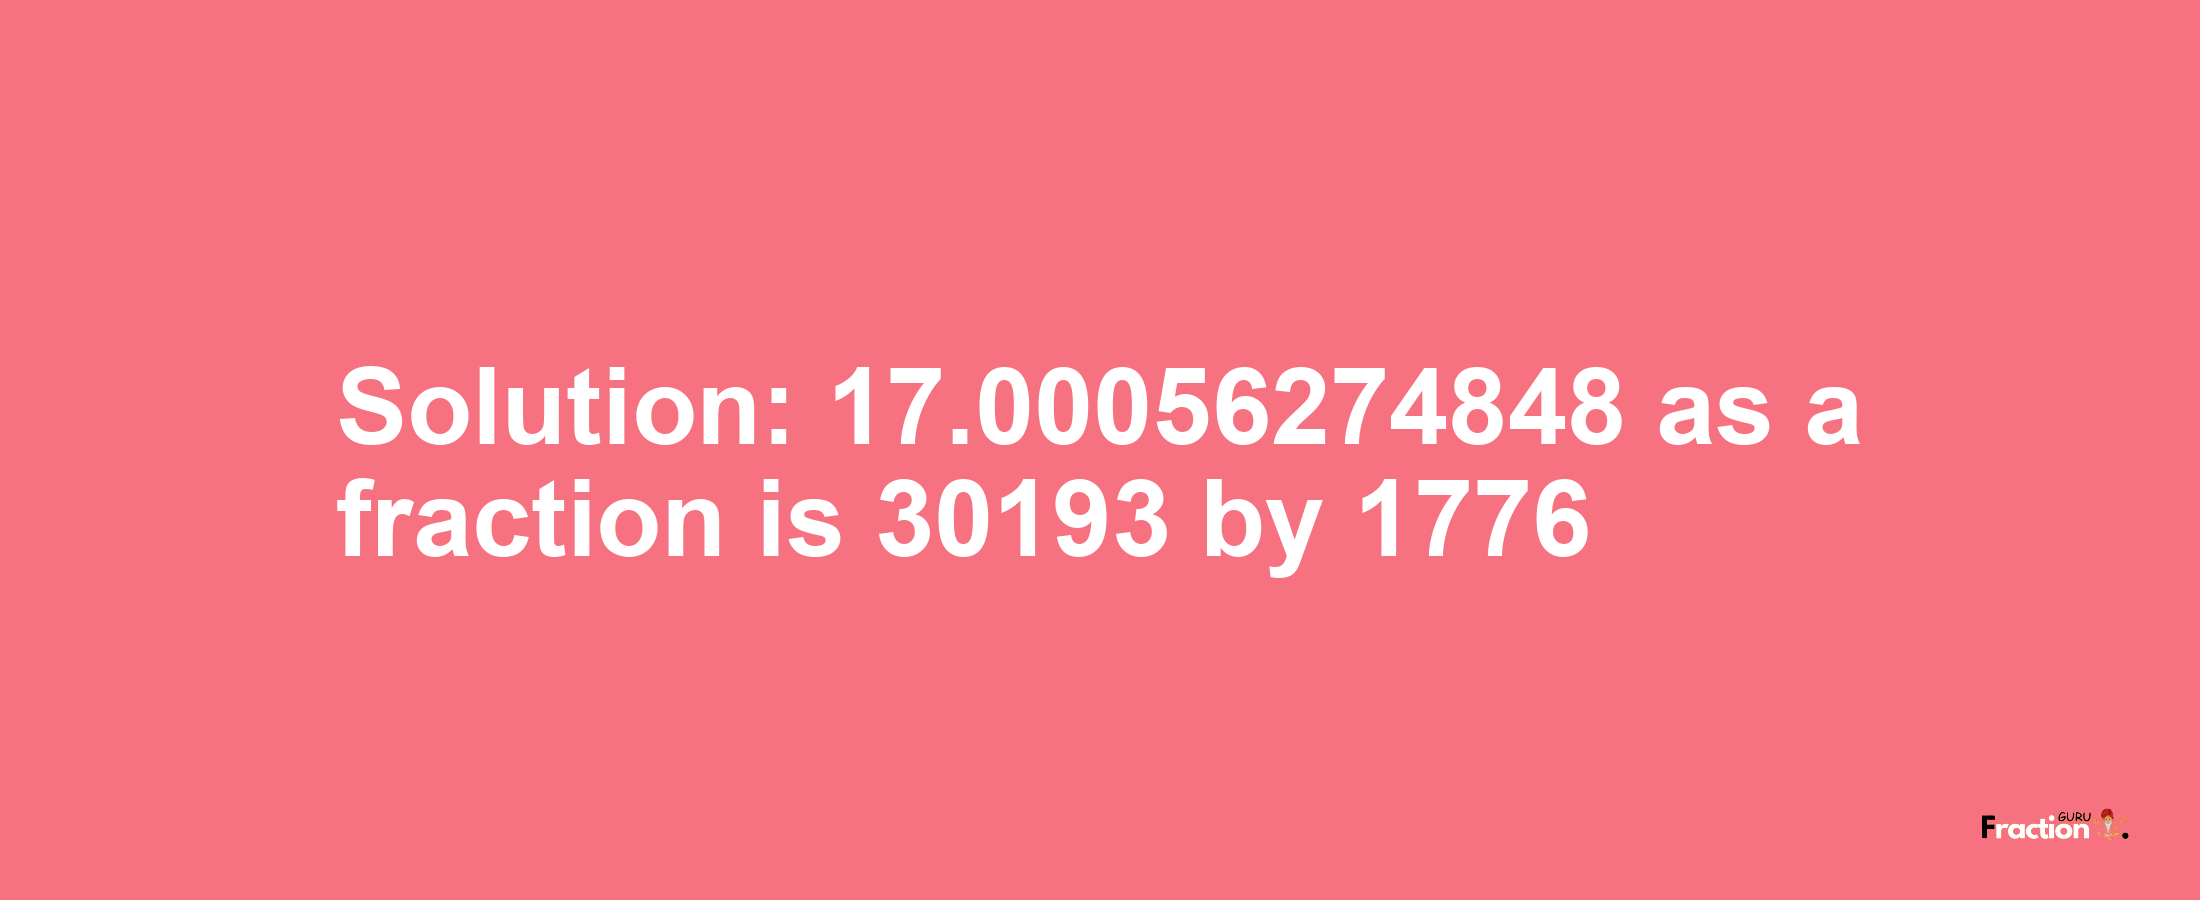 Solution:17.00056274848 as a fraction is 30193/1776